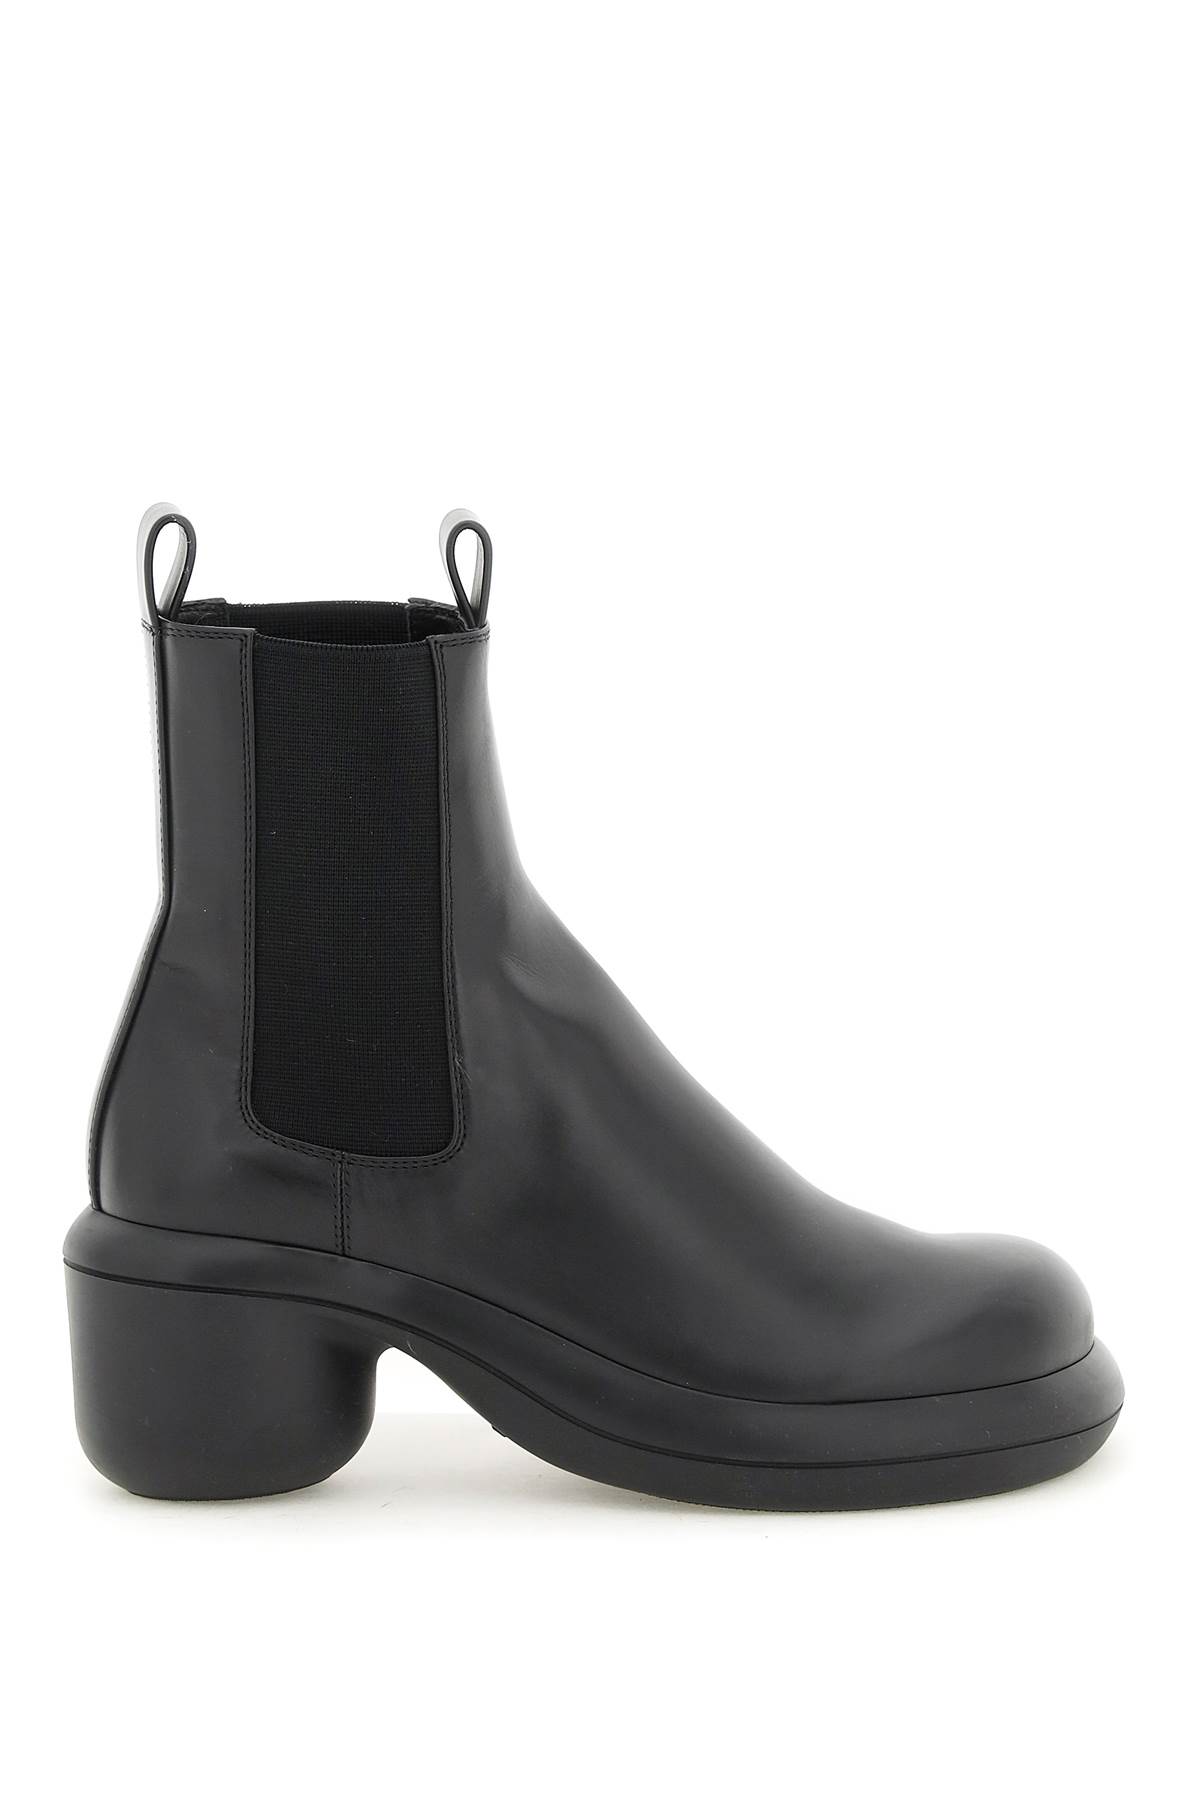 Jil Sander Leather Ankle Boots With Rounded Heel